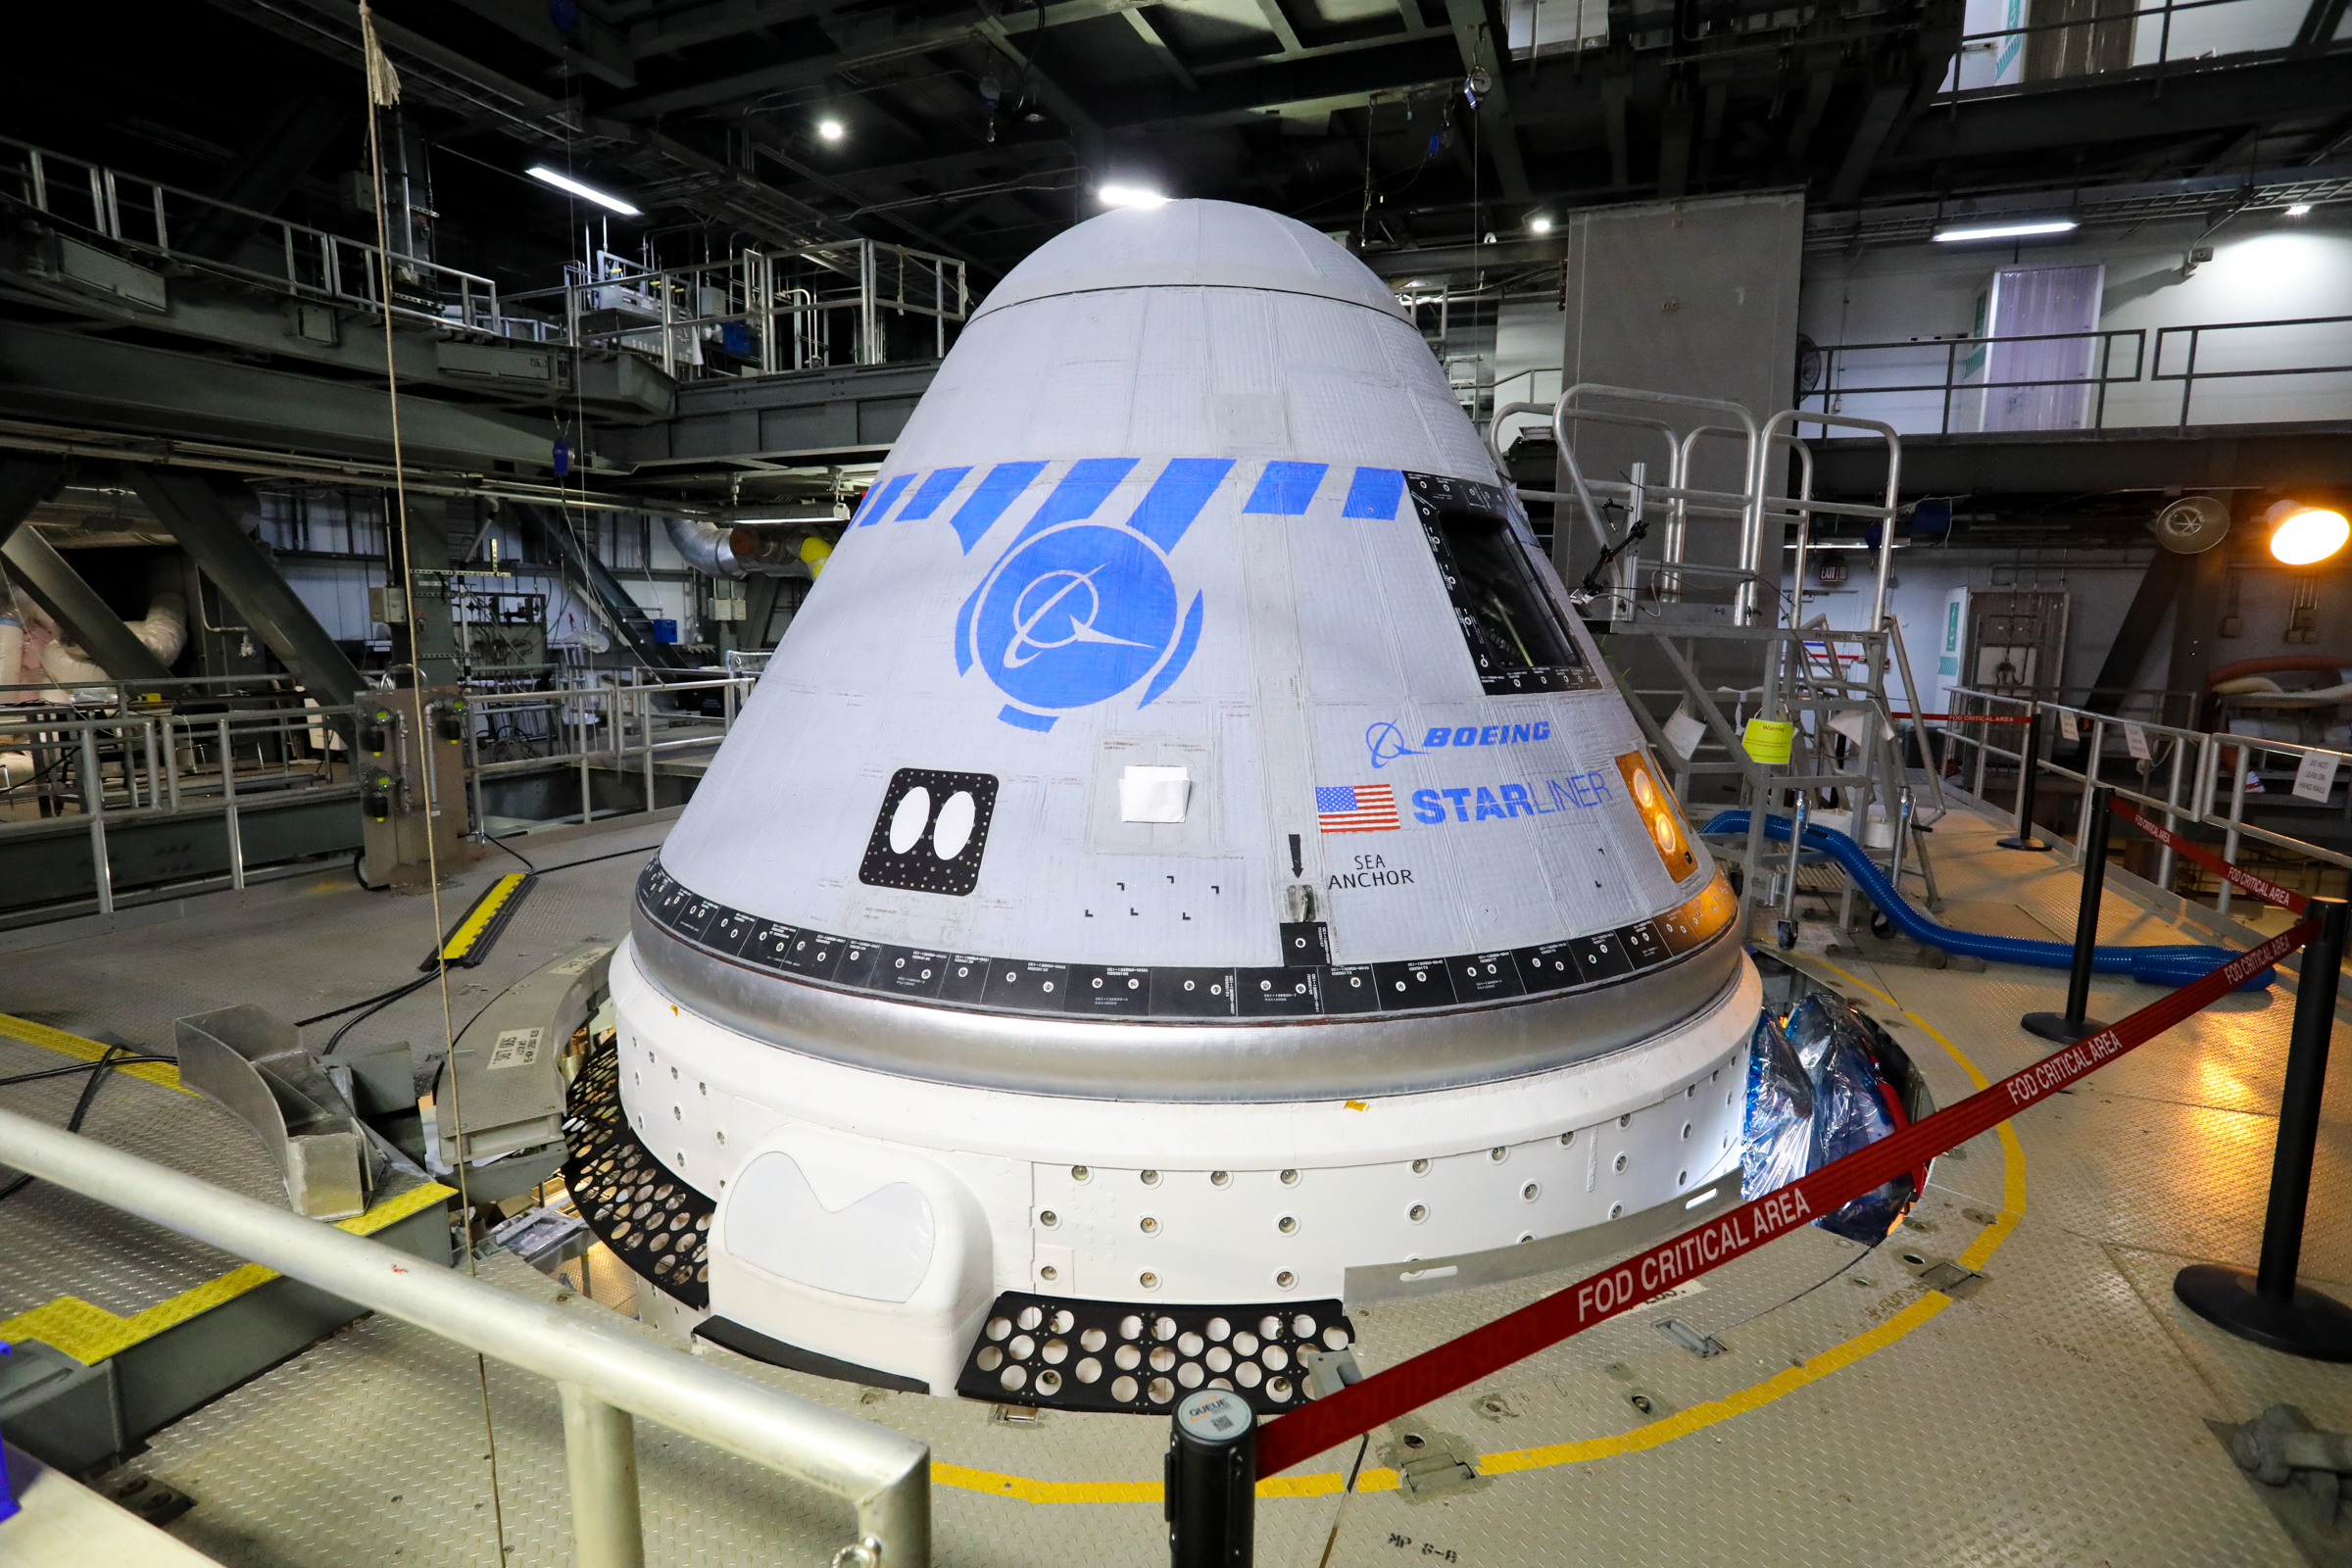 Boeing’s CST-100 Starliner spacecraft in the United Launch Alliance Vertical Integration Facility at Space Launch Complex 41.